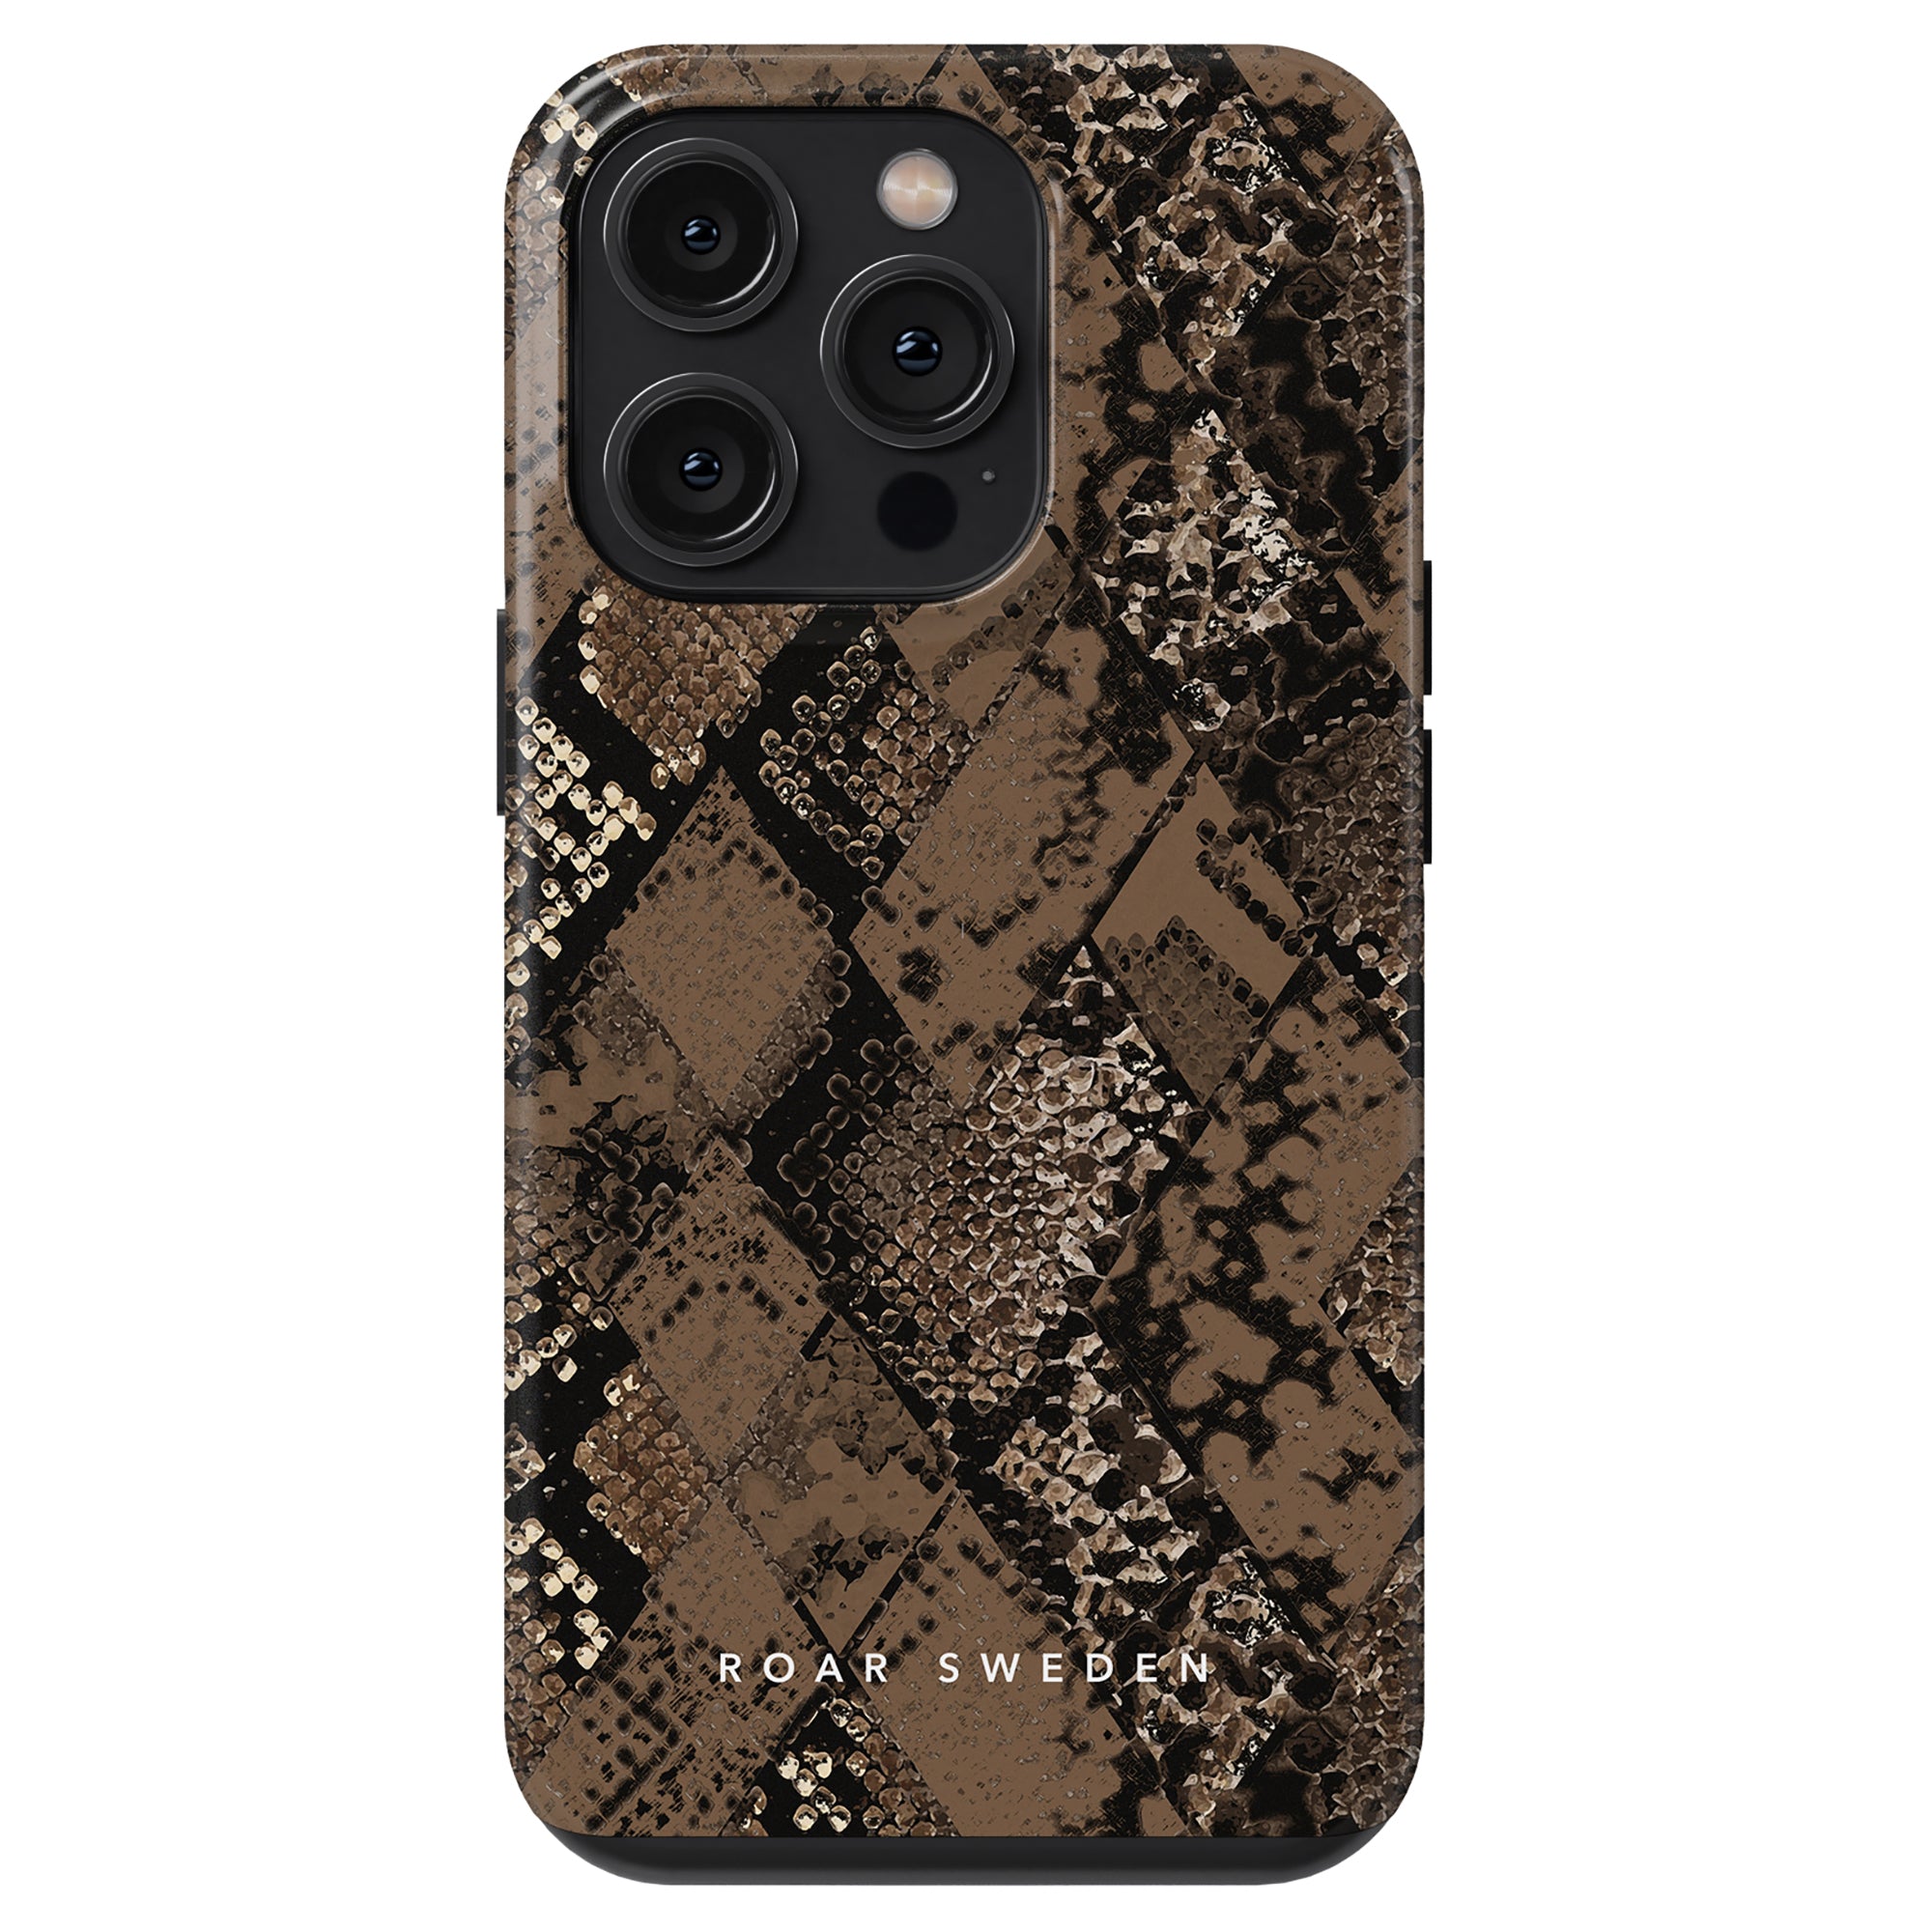 Boidae - Tough Case for iPhone 11 Pro Max offering sleek and stylish protection.